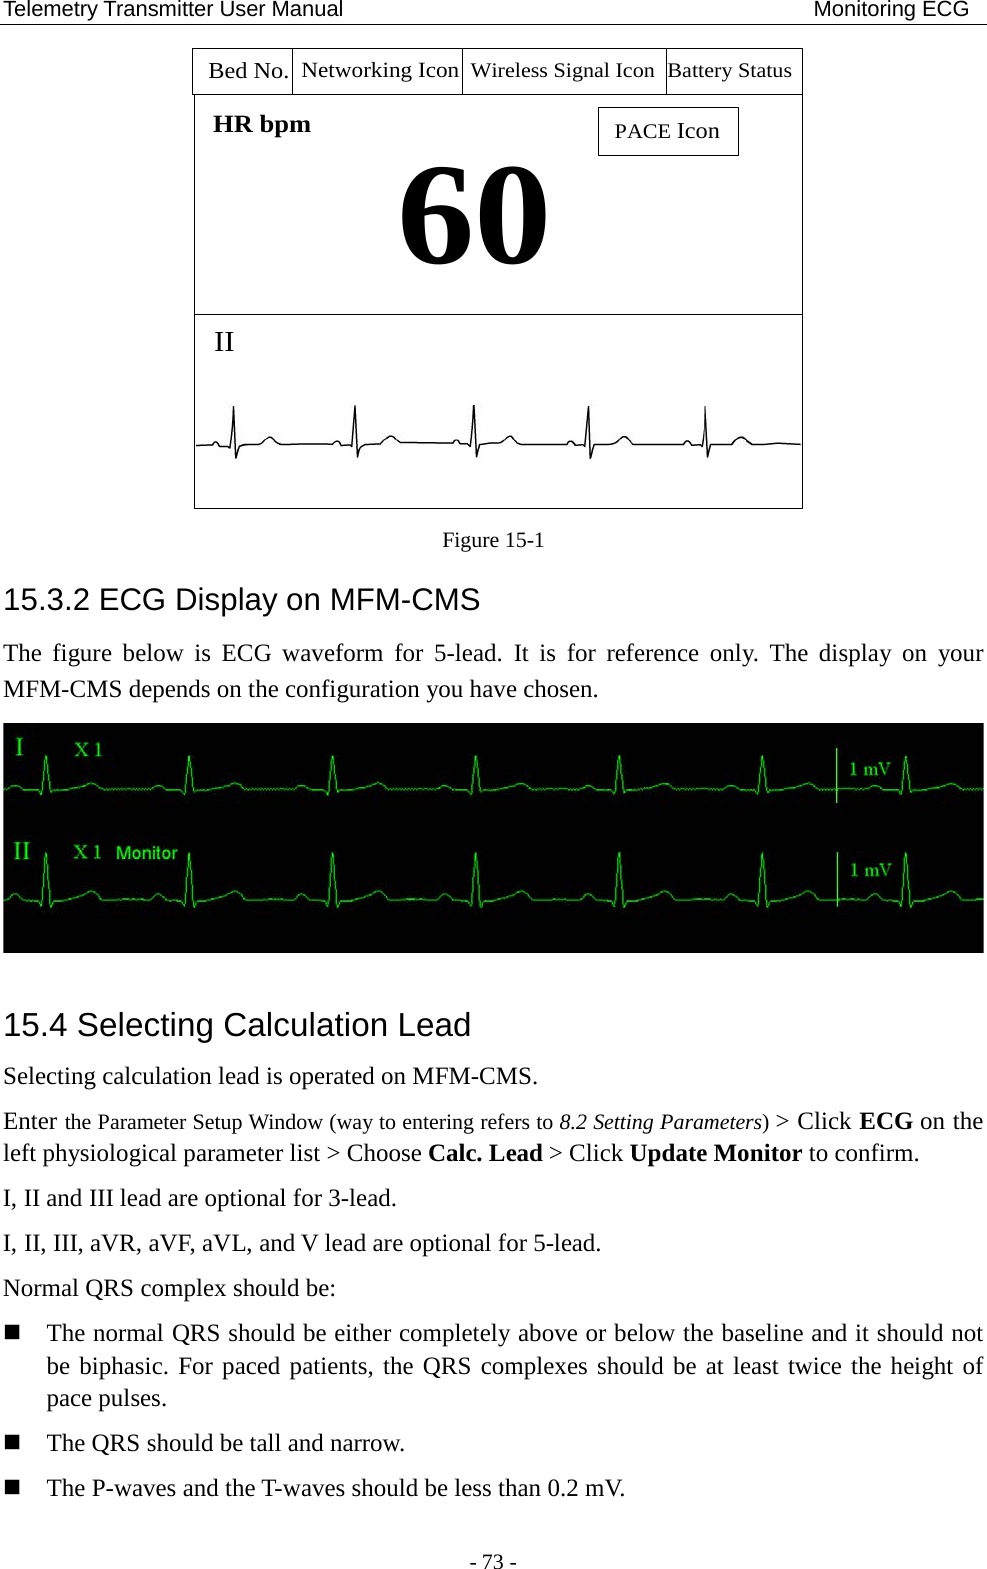 Telemetry Transmitter User Manual                                           Monitoring ECG 60HR bpmIIPACE IconBed No.Networking Icon Battery StatusWireless Signal Icon Figure 15-1 15.3.2 ECG Display on MFM-CMS The  figure below is  ECG waveform for 5-lead.  It  is for reference only. The display on your MFM-CMS depends on the configuration you have chosen.  15.4 Selecting Calculation Lead Selecting calculation lead is operated on MFM-CMS.   Enter the Parameter Setup Window (way to entering refers to 8.2 Setting Parameters) &gt; Click ECG on the left physiological parameter list &gt; Choose Calc. Lead &gt; Click Update Monitor to confirm. I, II and III lead are optional for 3-lead. I, II, III, aVR, aVF, aVL, and V lead are optional for 5-lead. Normal QRS complex should be:  The normal QRS should be either completely above or below the baseline and it should not be biphasic. For paced patients, the QRS complexes should be at least twice the height of pace pulses.    The QRS should be tall and narrow.  The P-waves and the T-waves should be less than 0.2 mV. - 73 - 